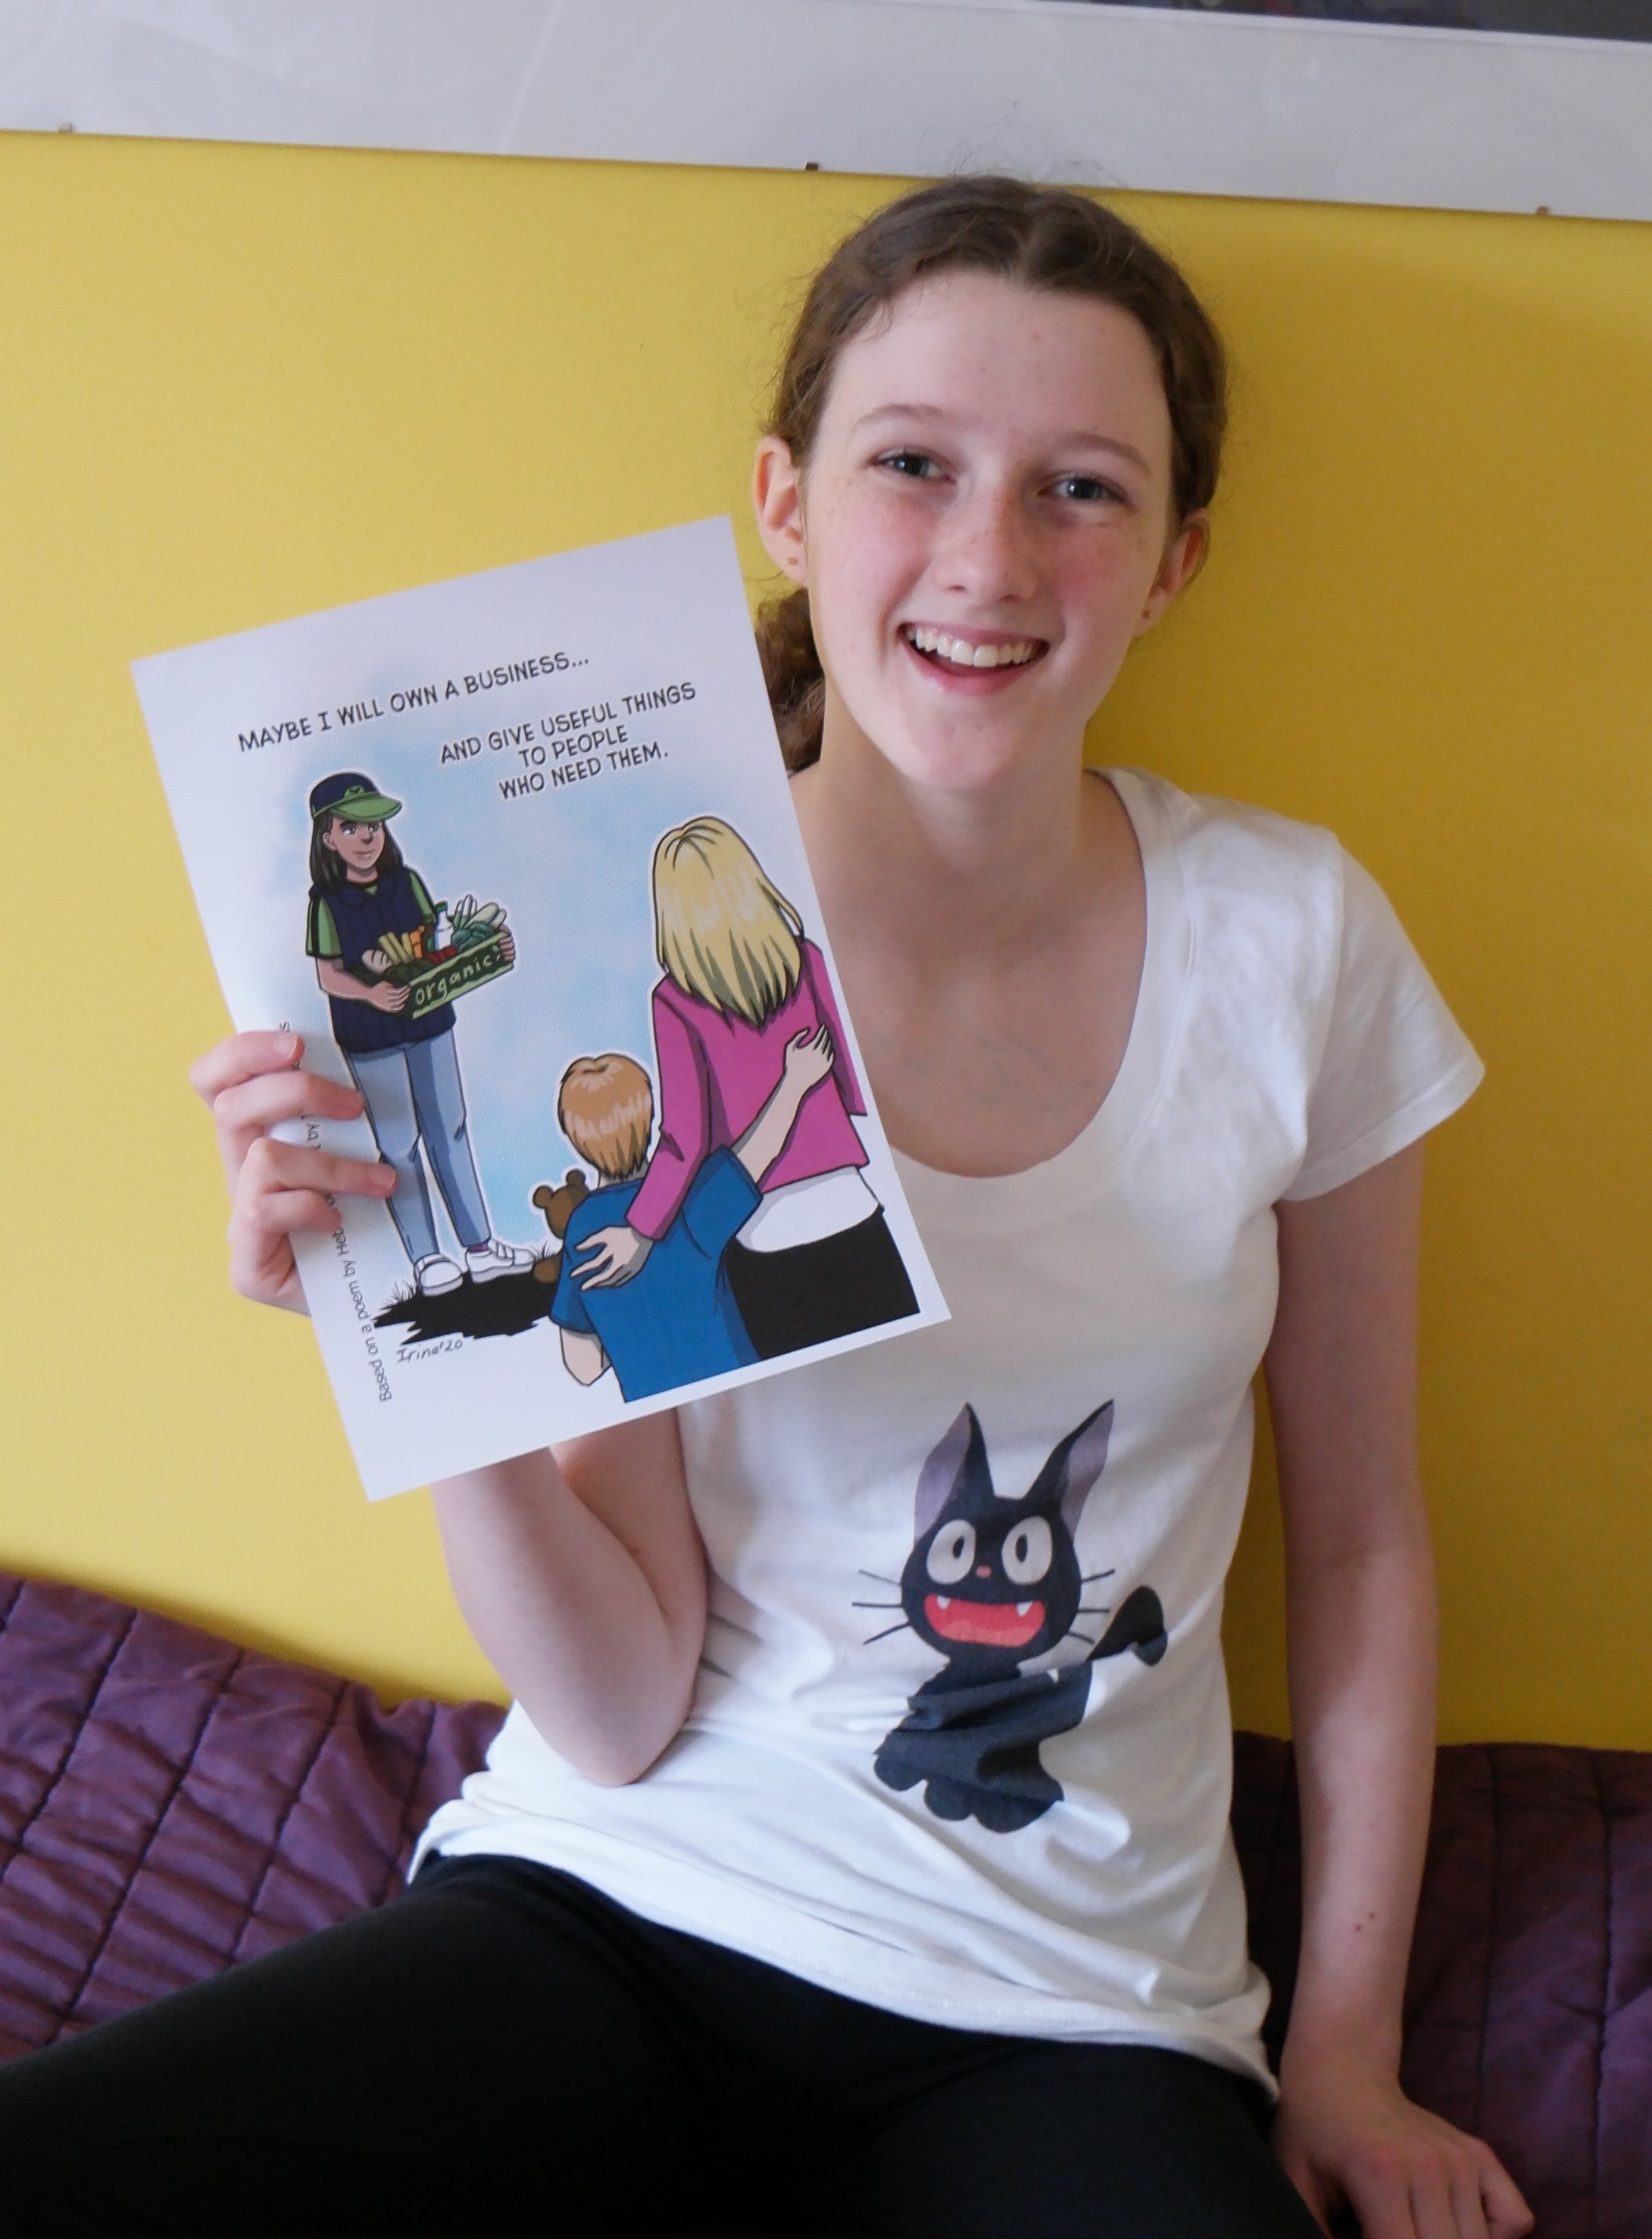 Two Ely Residents Have Their Poems Selected To Become Comic Book